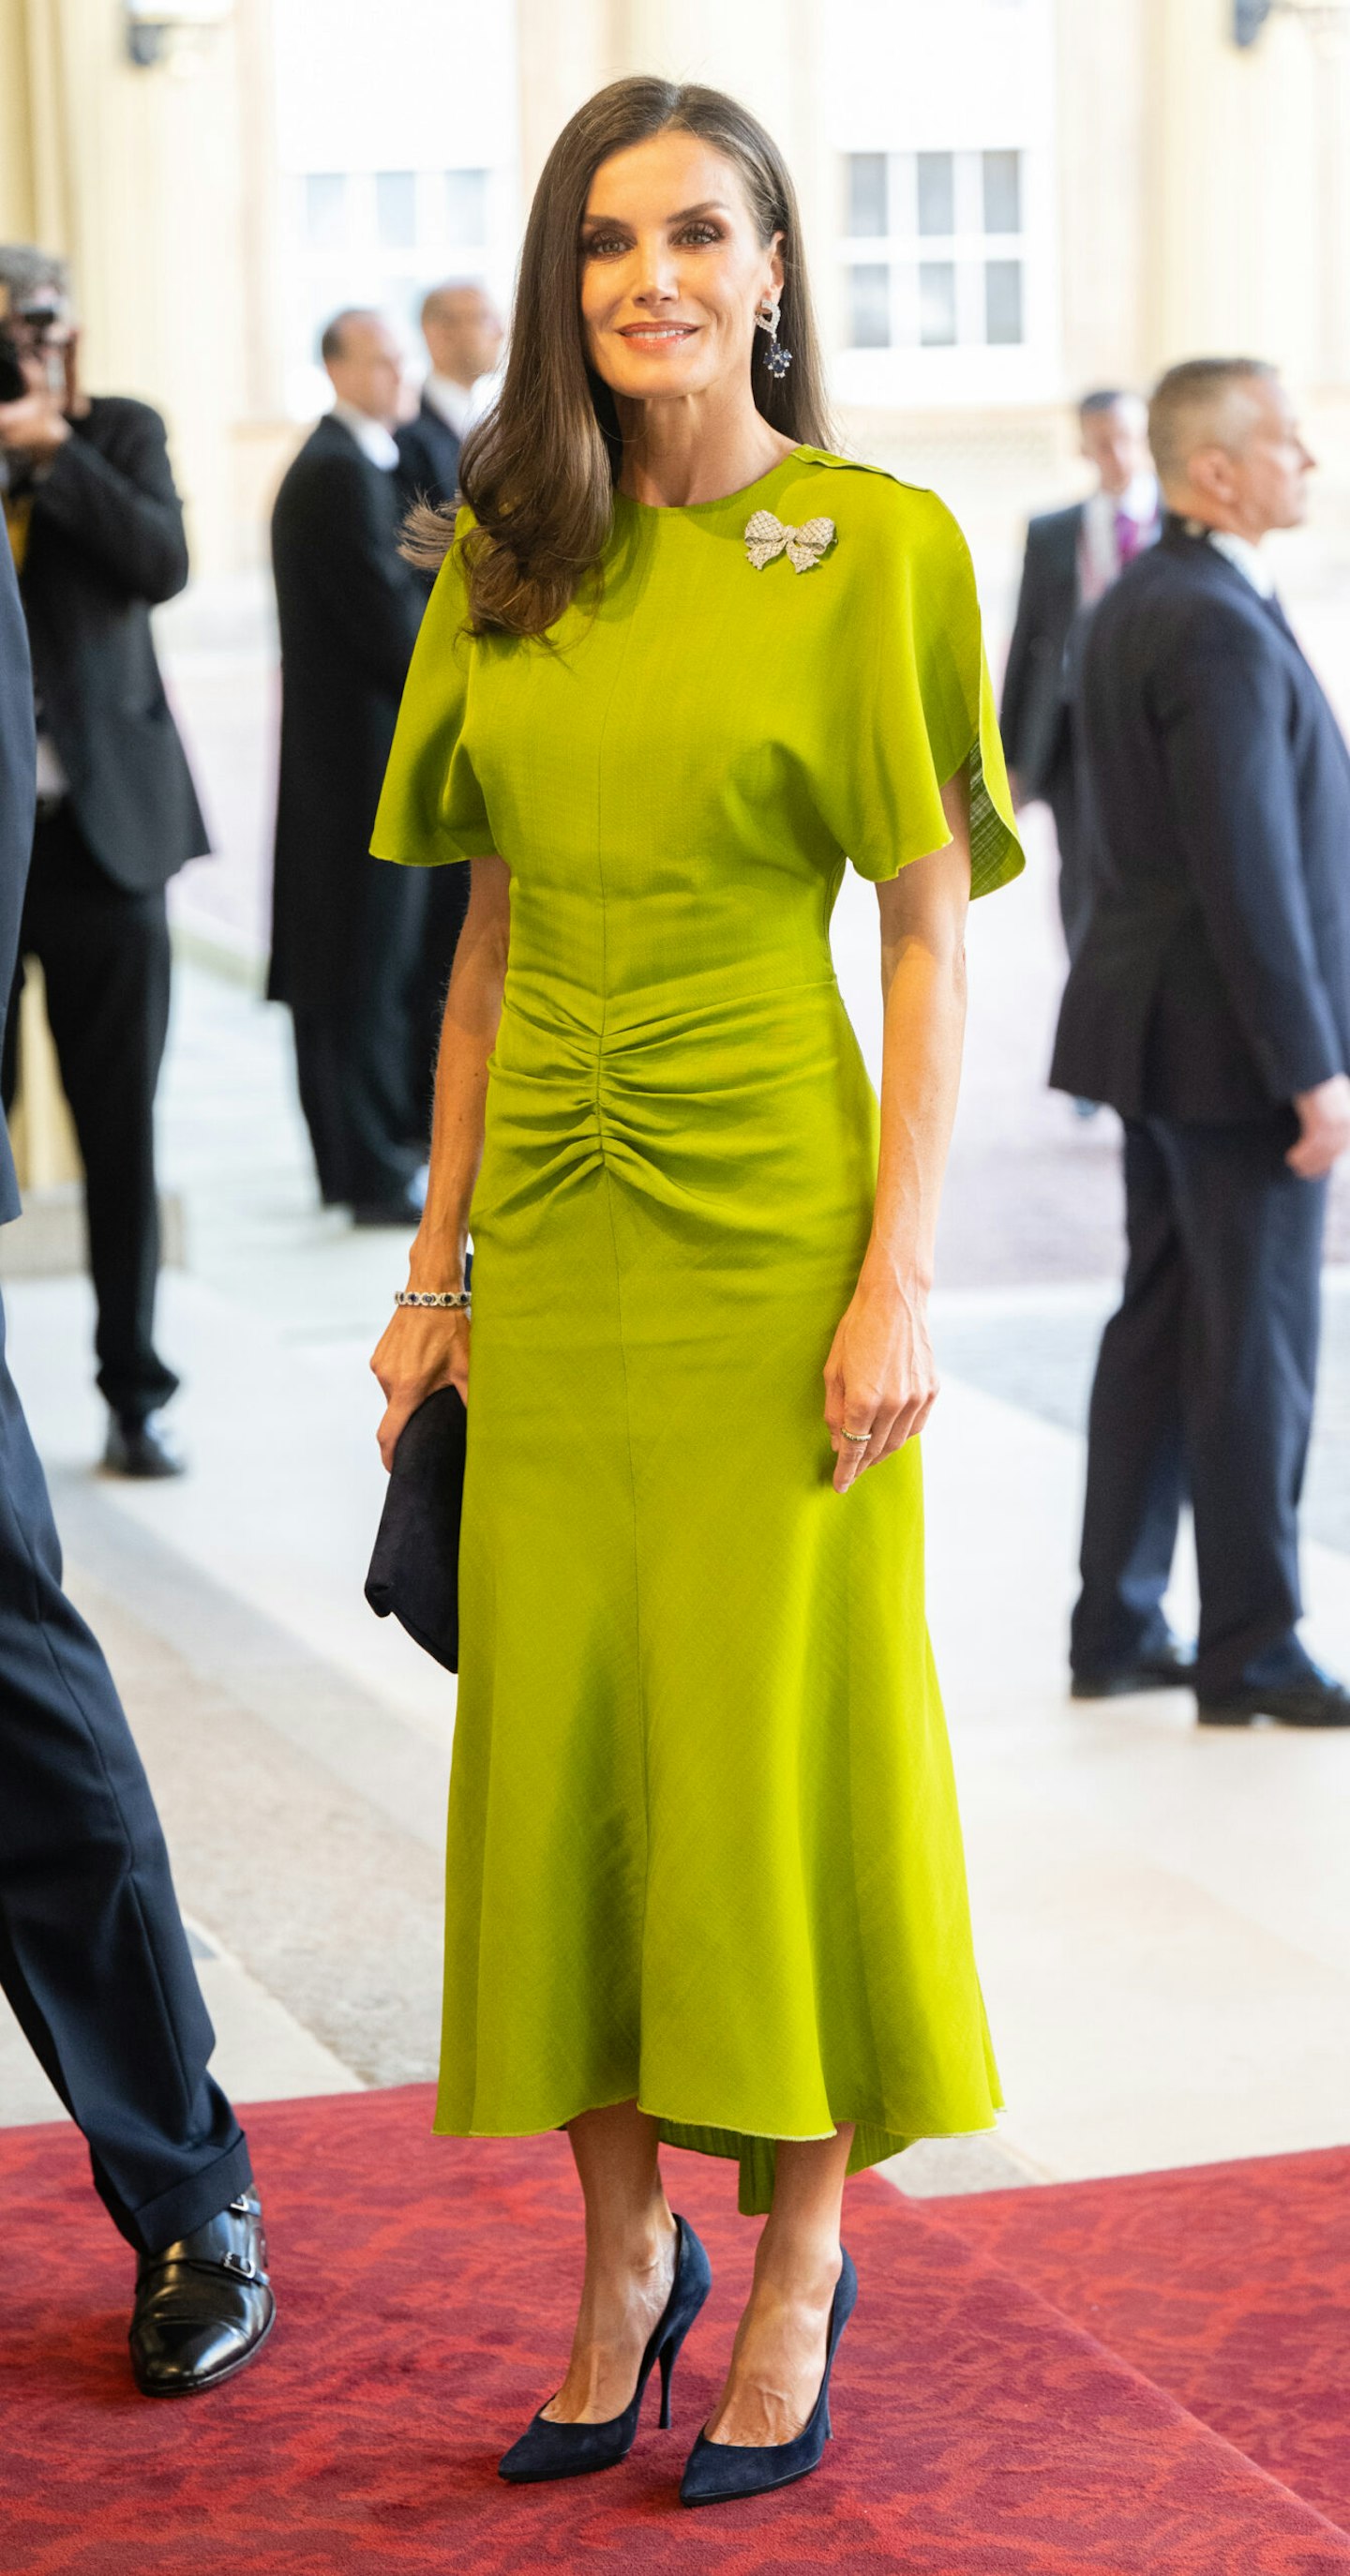 Queen Letizia of Spain attends the Coronation Reception For Overseas Guests at Buckingham Palace.